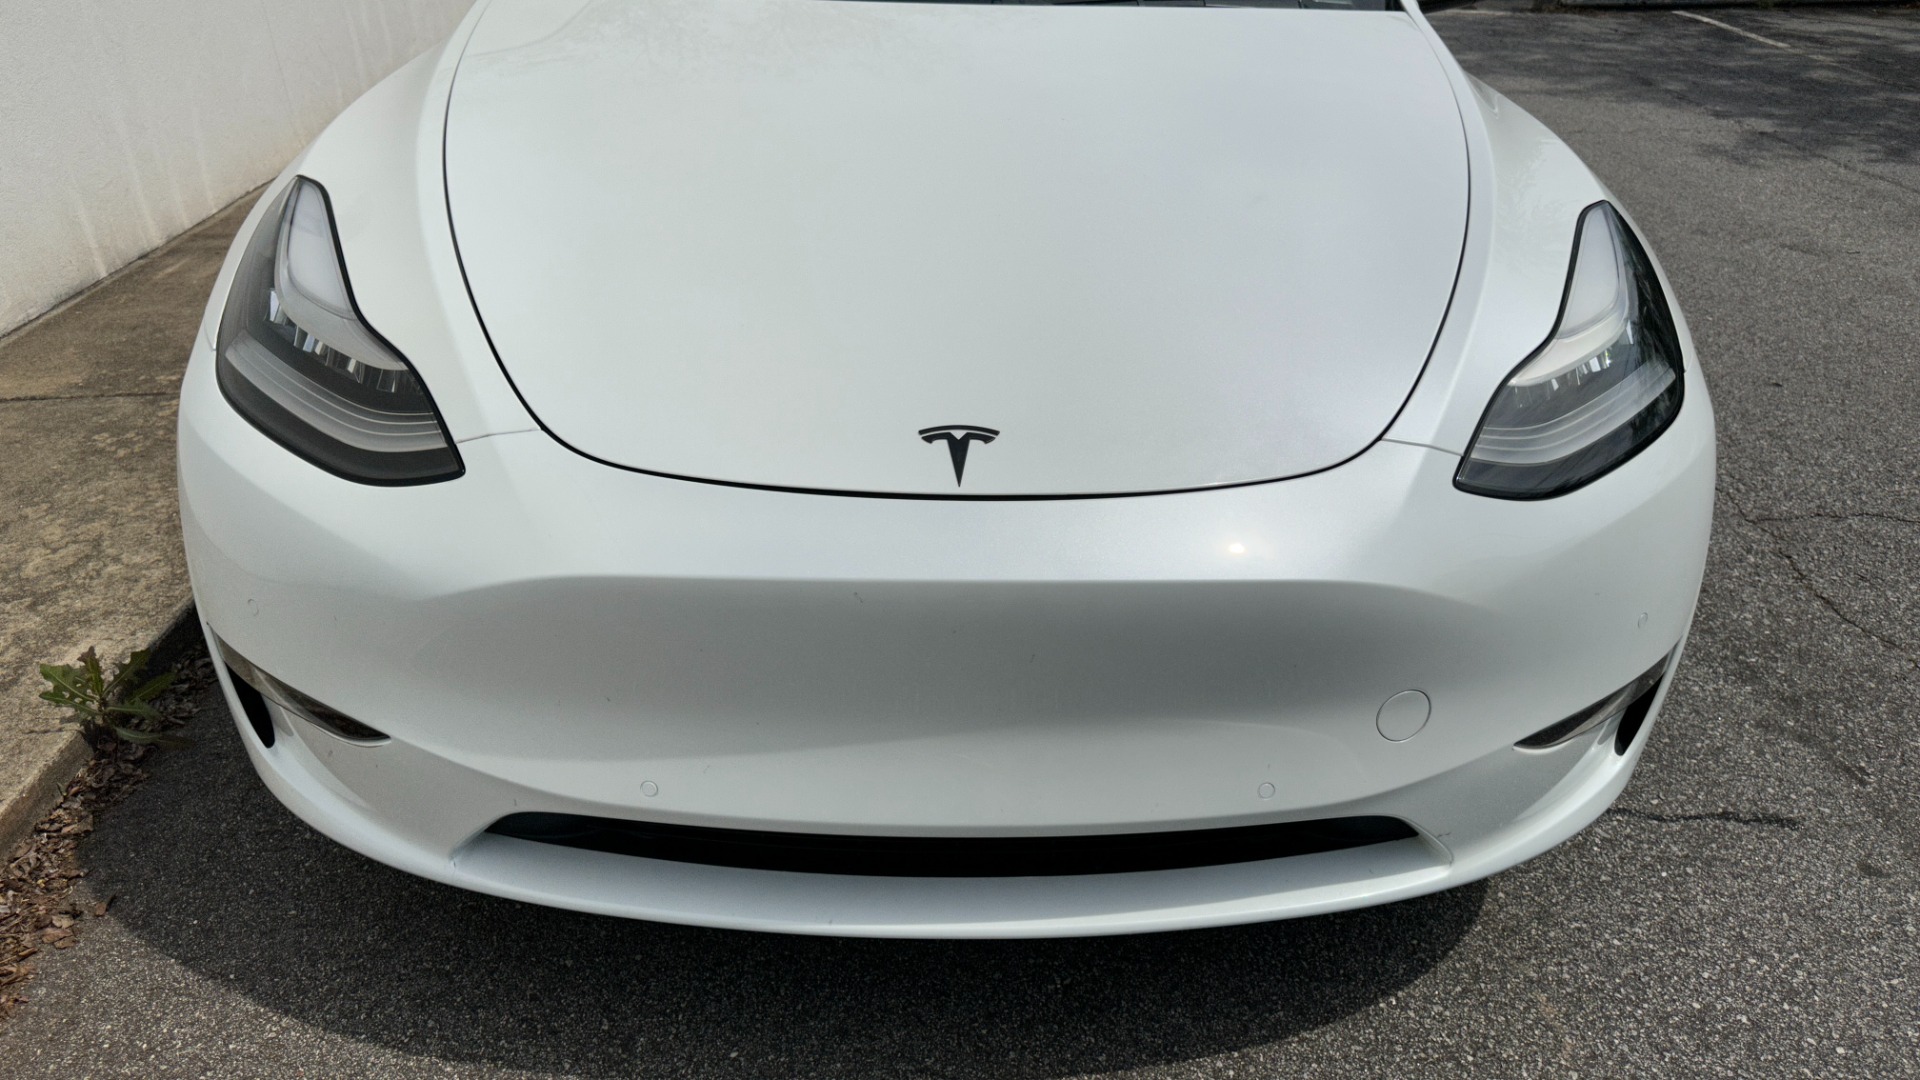 Used 2020 Tesla MODEL Y LONG RANGE ACCELERATION BOOST / AUTOPILOT / STANDARD CONNECTIVITY / WOOD TRIM for sale $44,495 at Formula Imports in Charlotte NC 28227 8